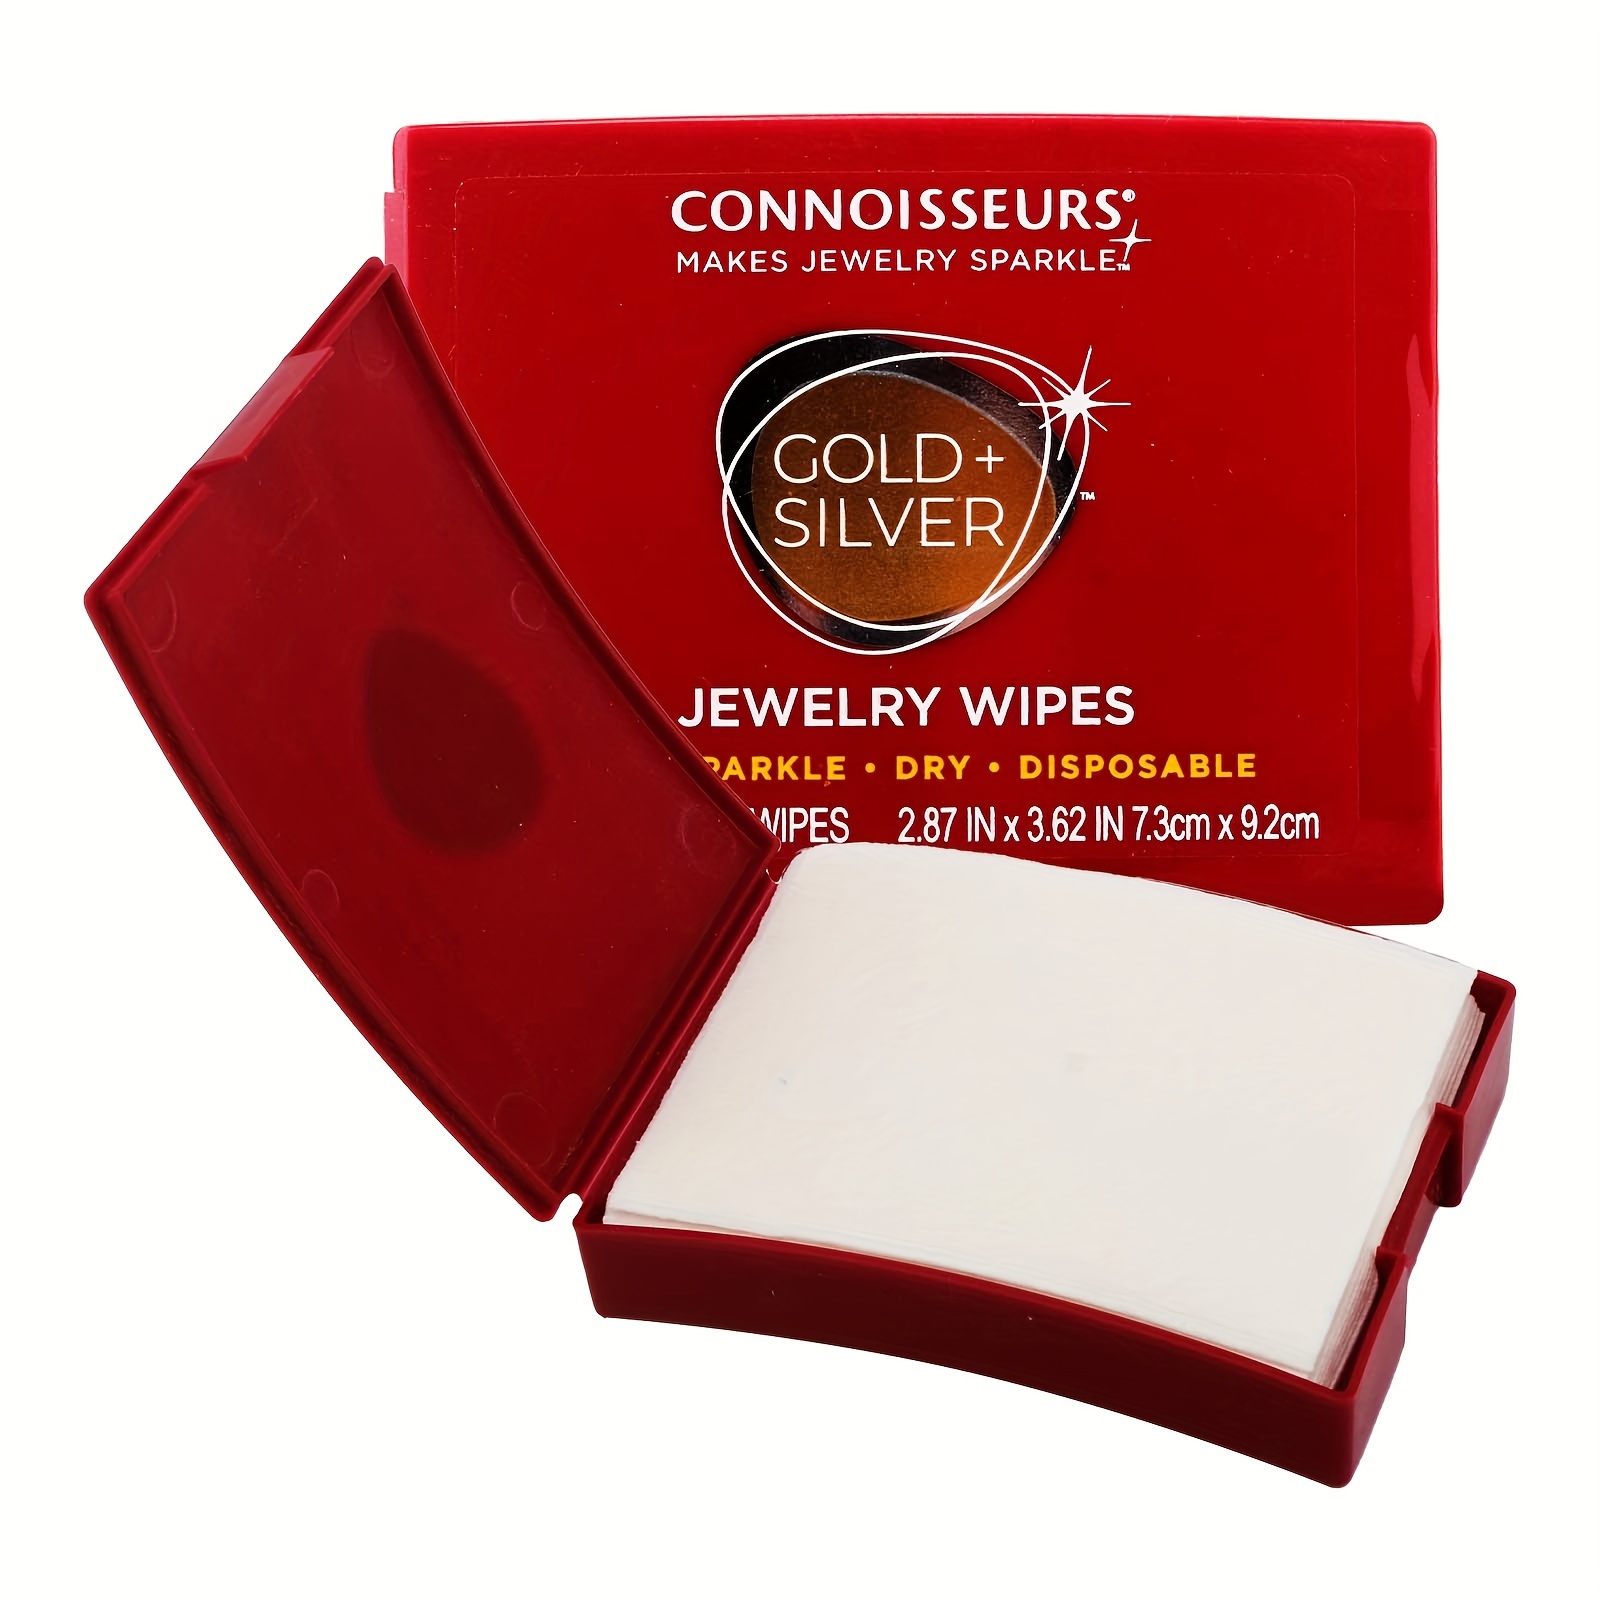 Wipes for gold jewelry at Flume technology